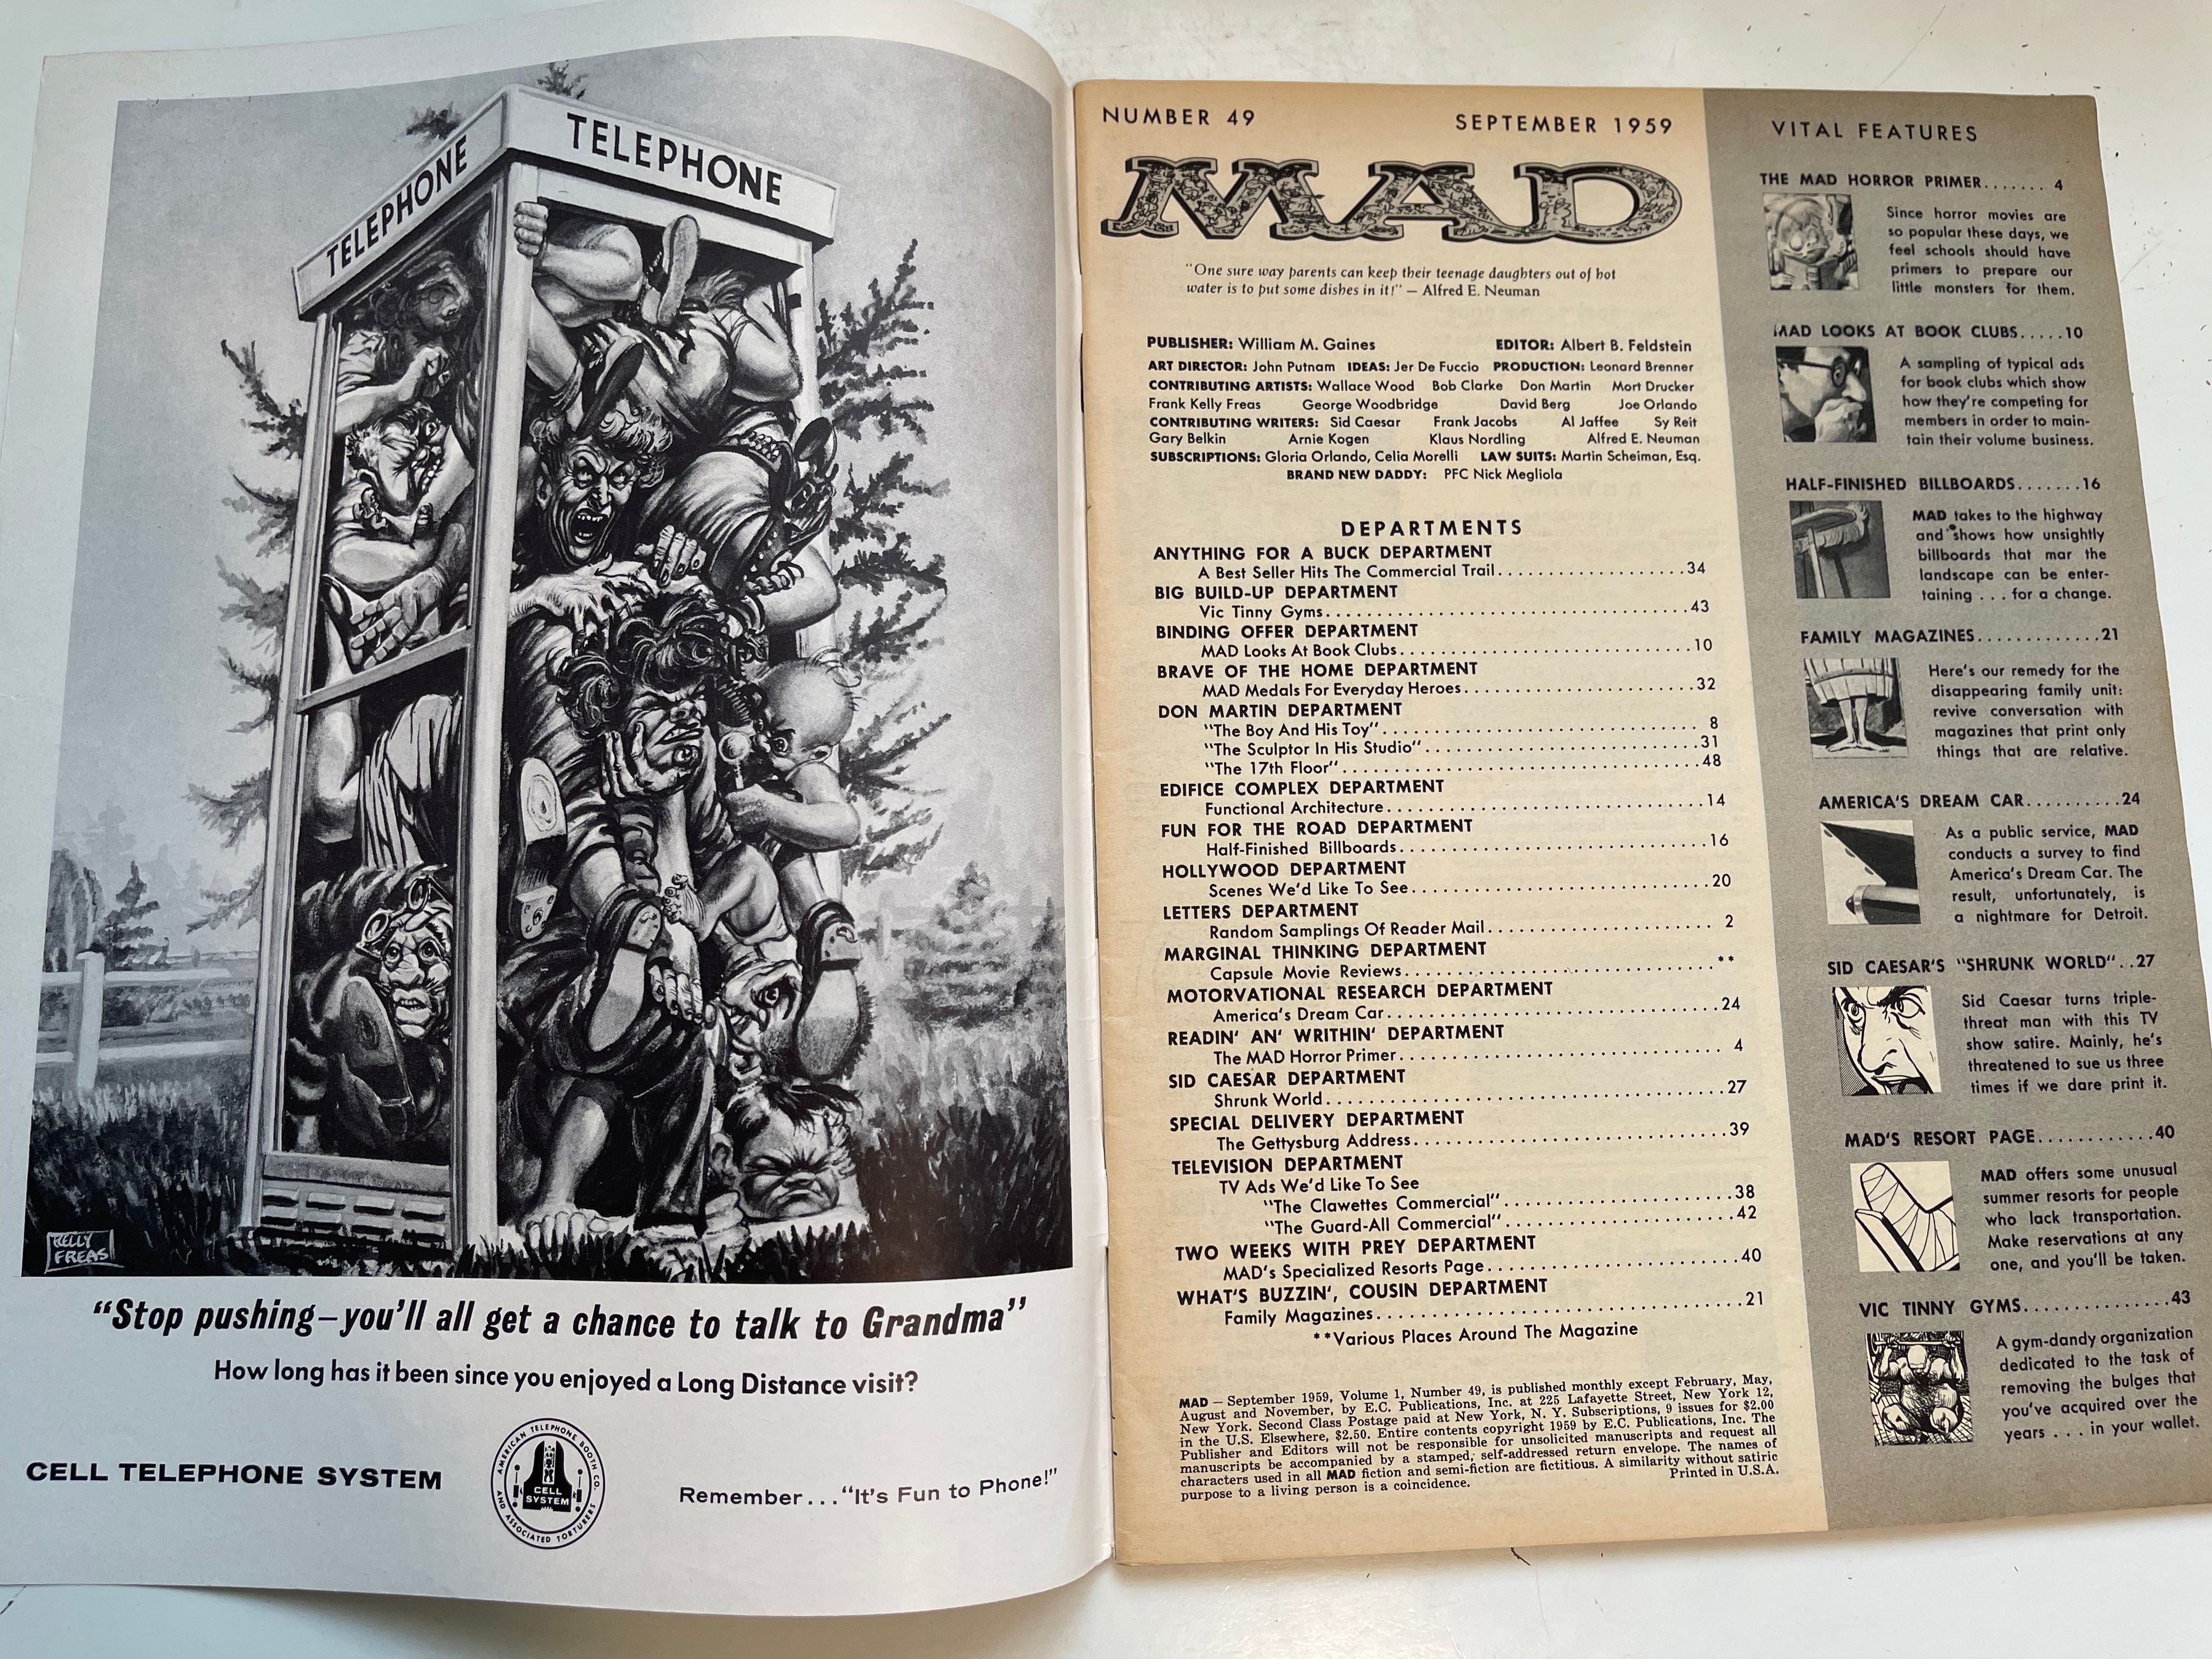 Mad Magazine #49 high grade condition from 1959